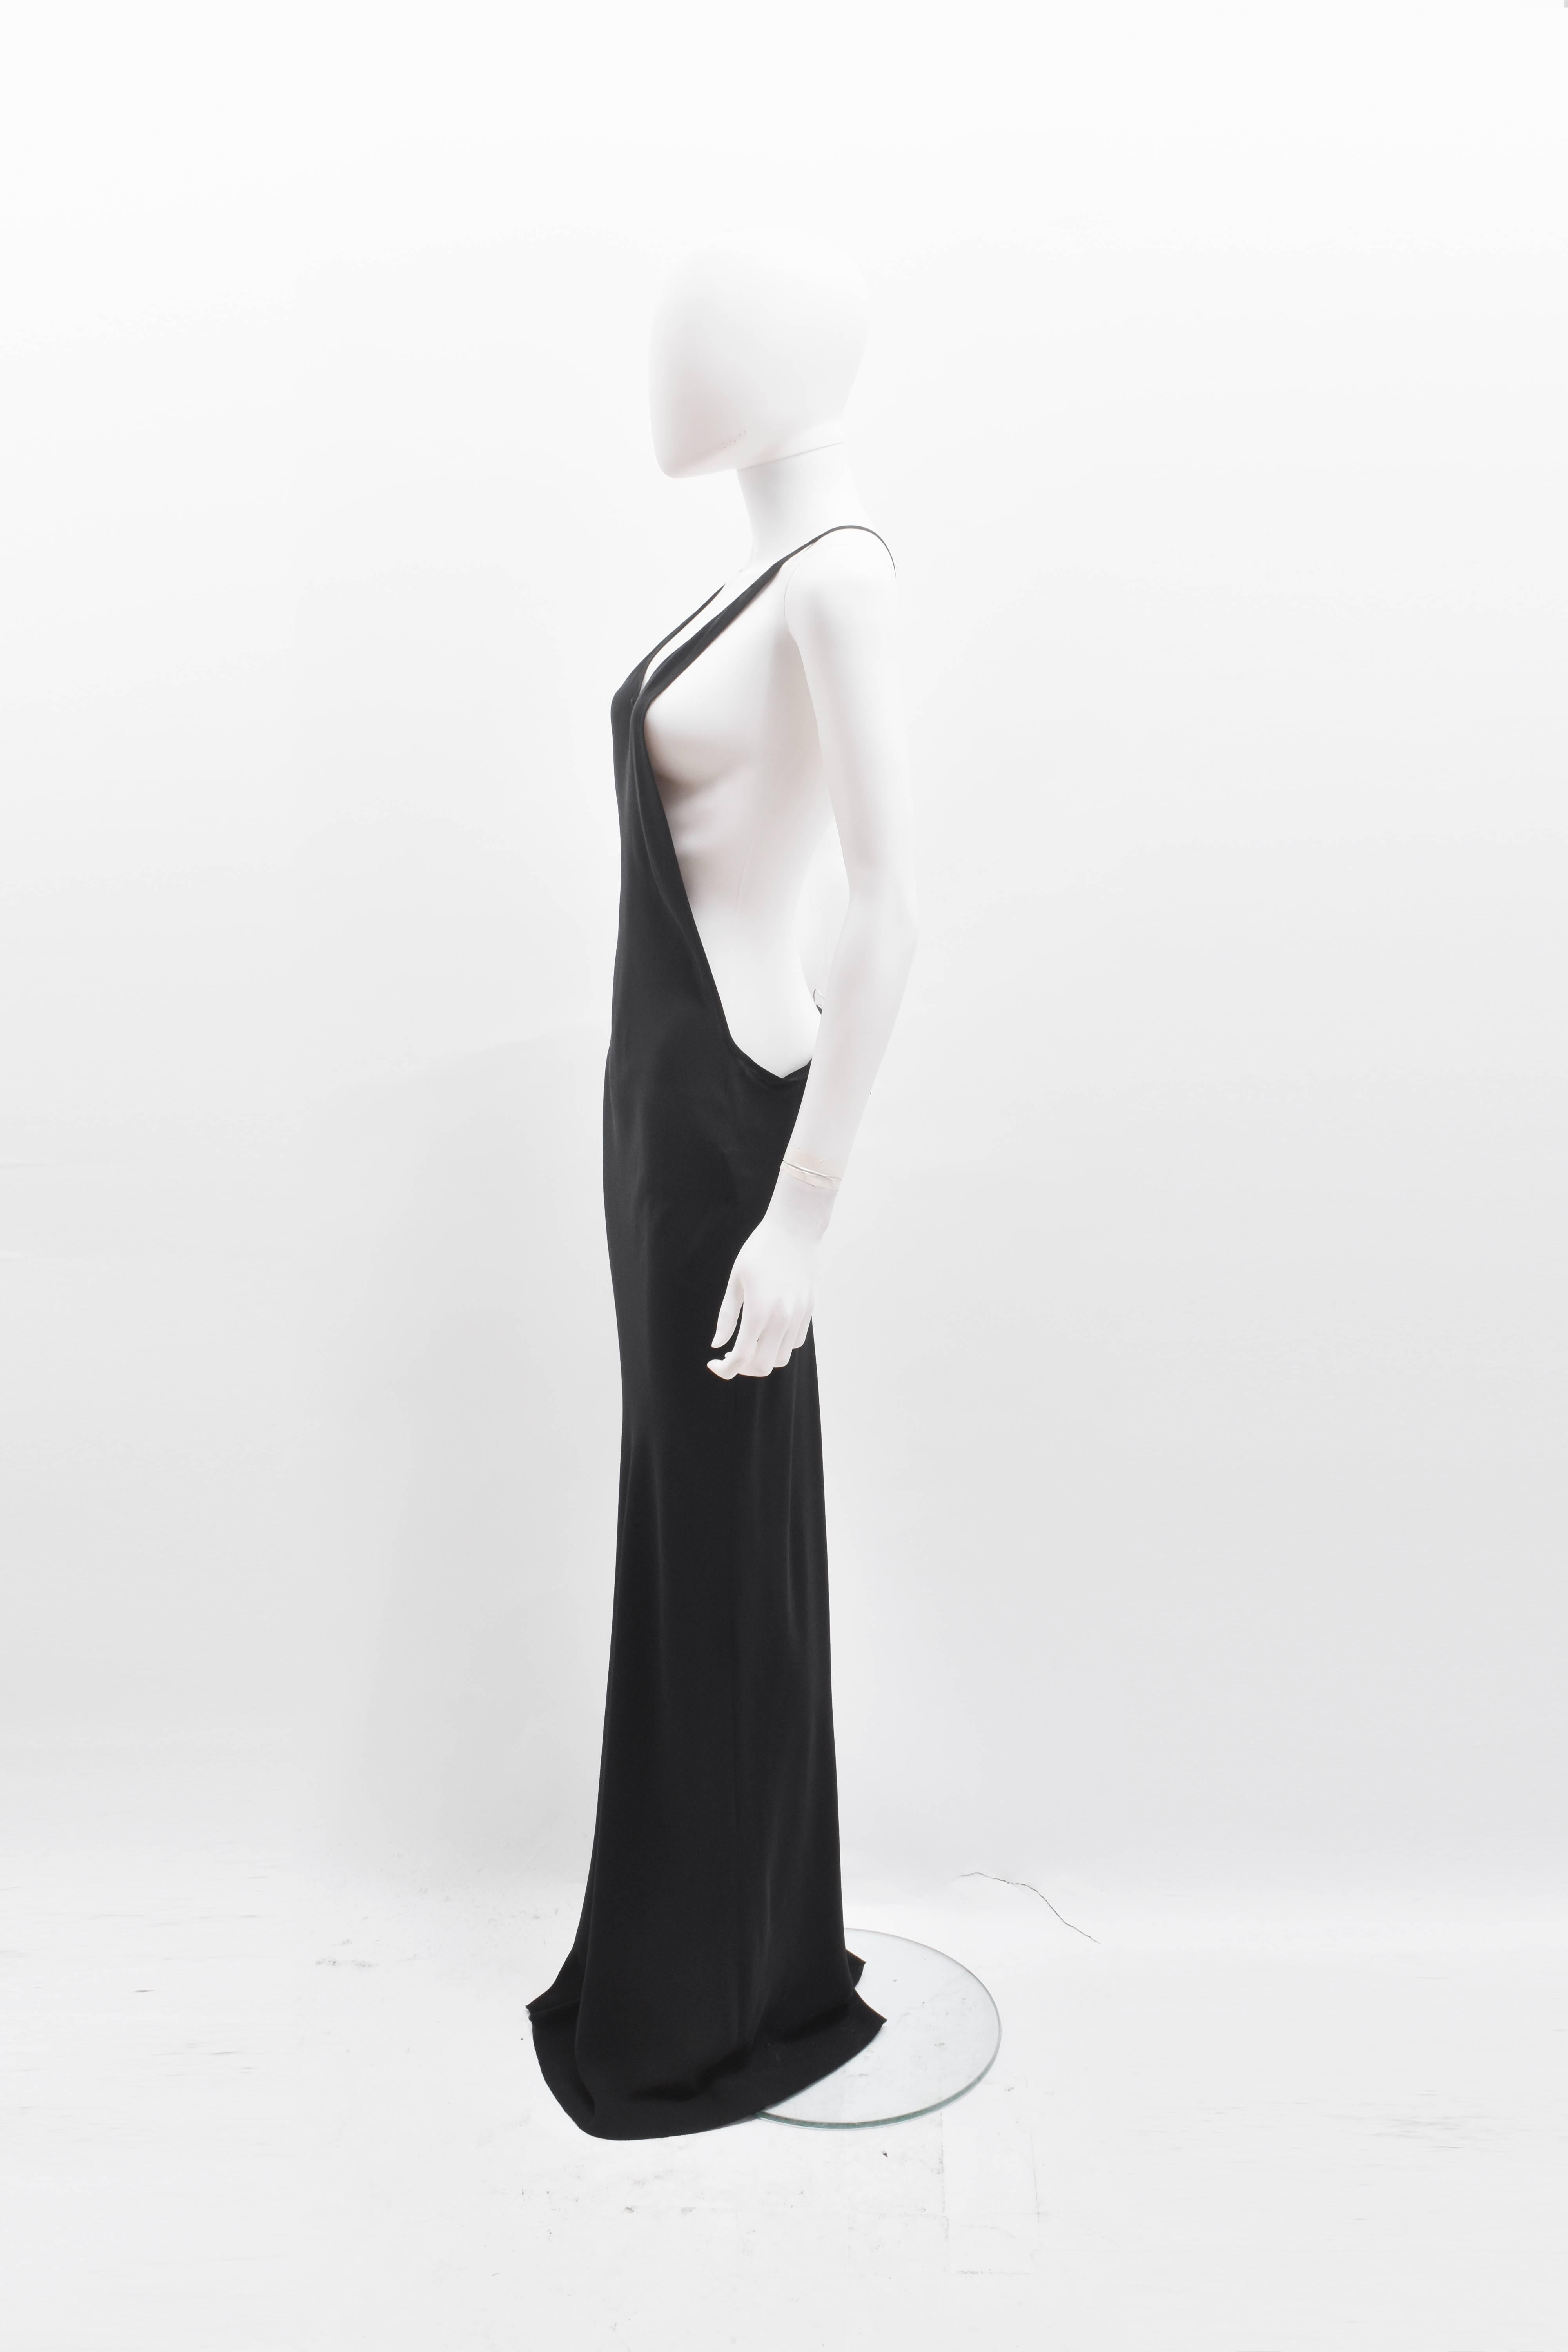 A beautiful and elegant black floor length silk dress from Belgian designer Ann Demeulemeester. The dress has a long and slim shape that skims the body, with strappy racerback shoulder straps and a low neckline. From the back, the dress also has an